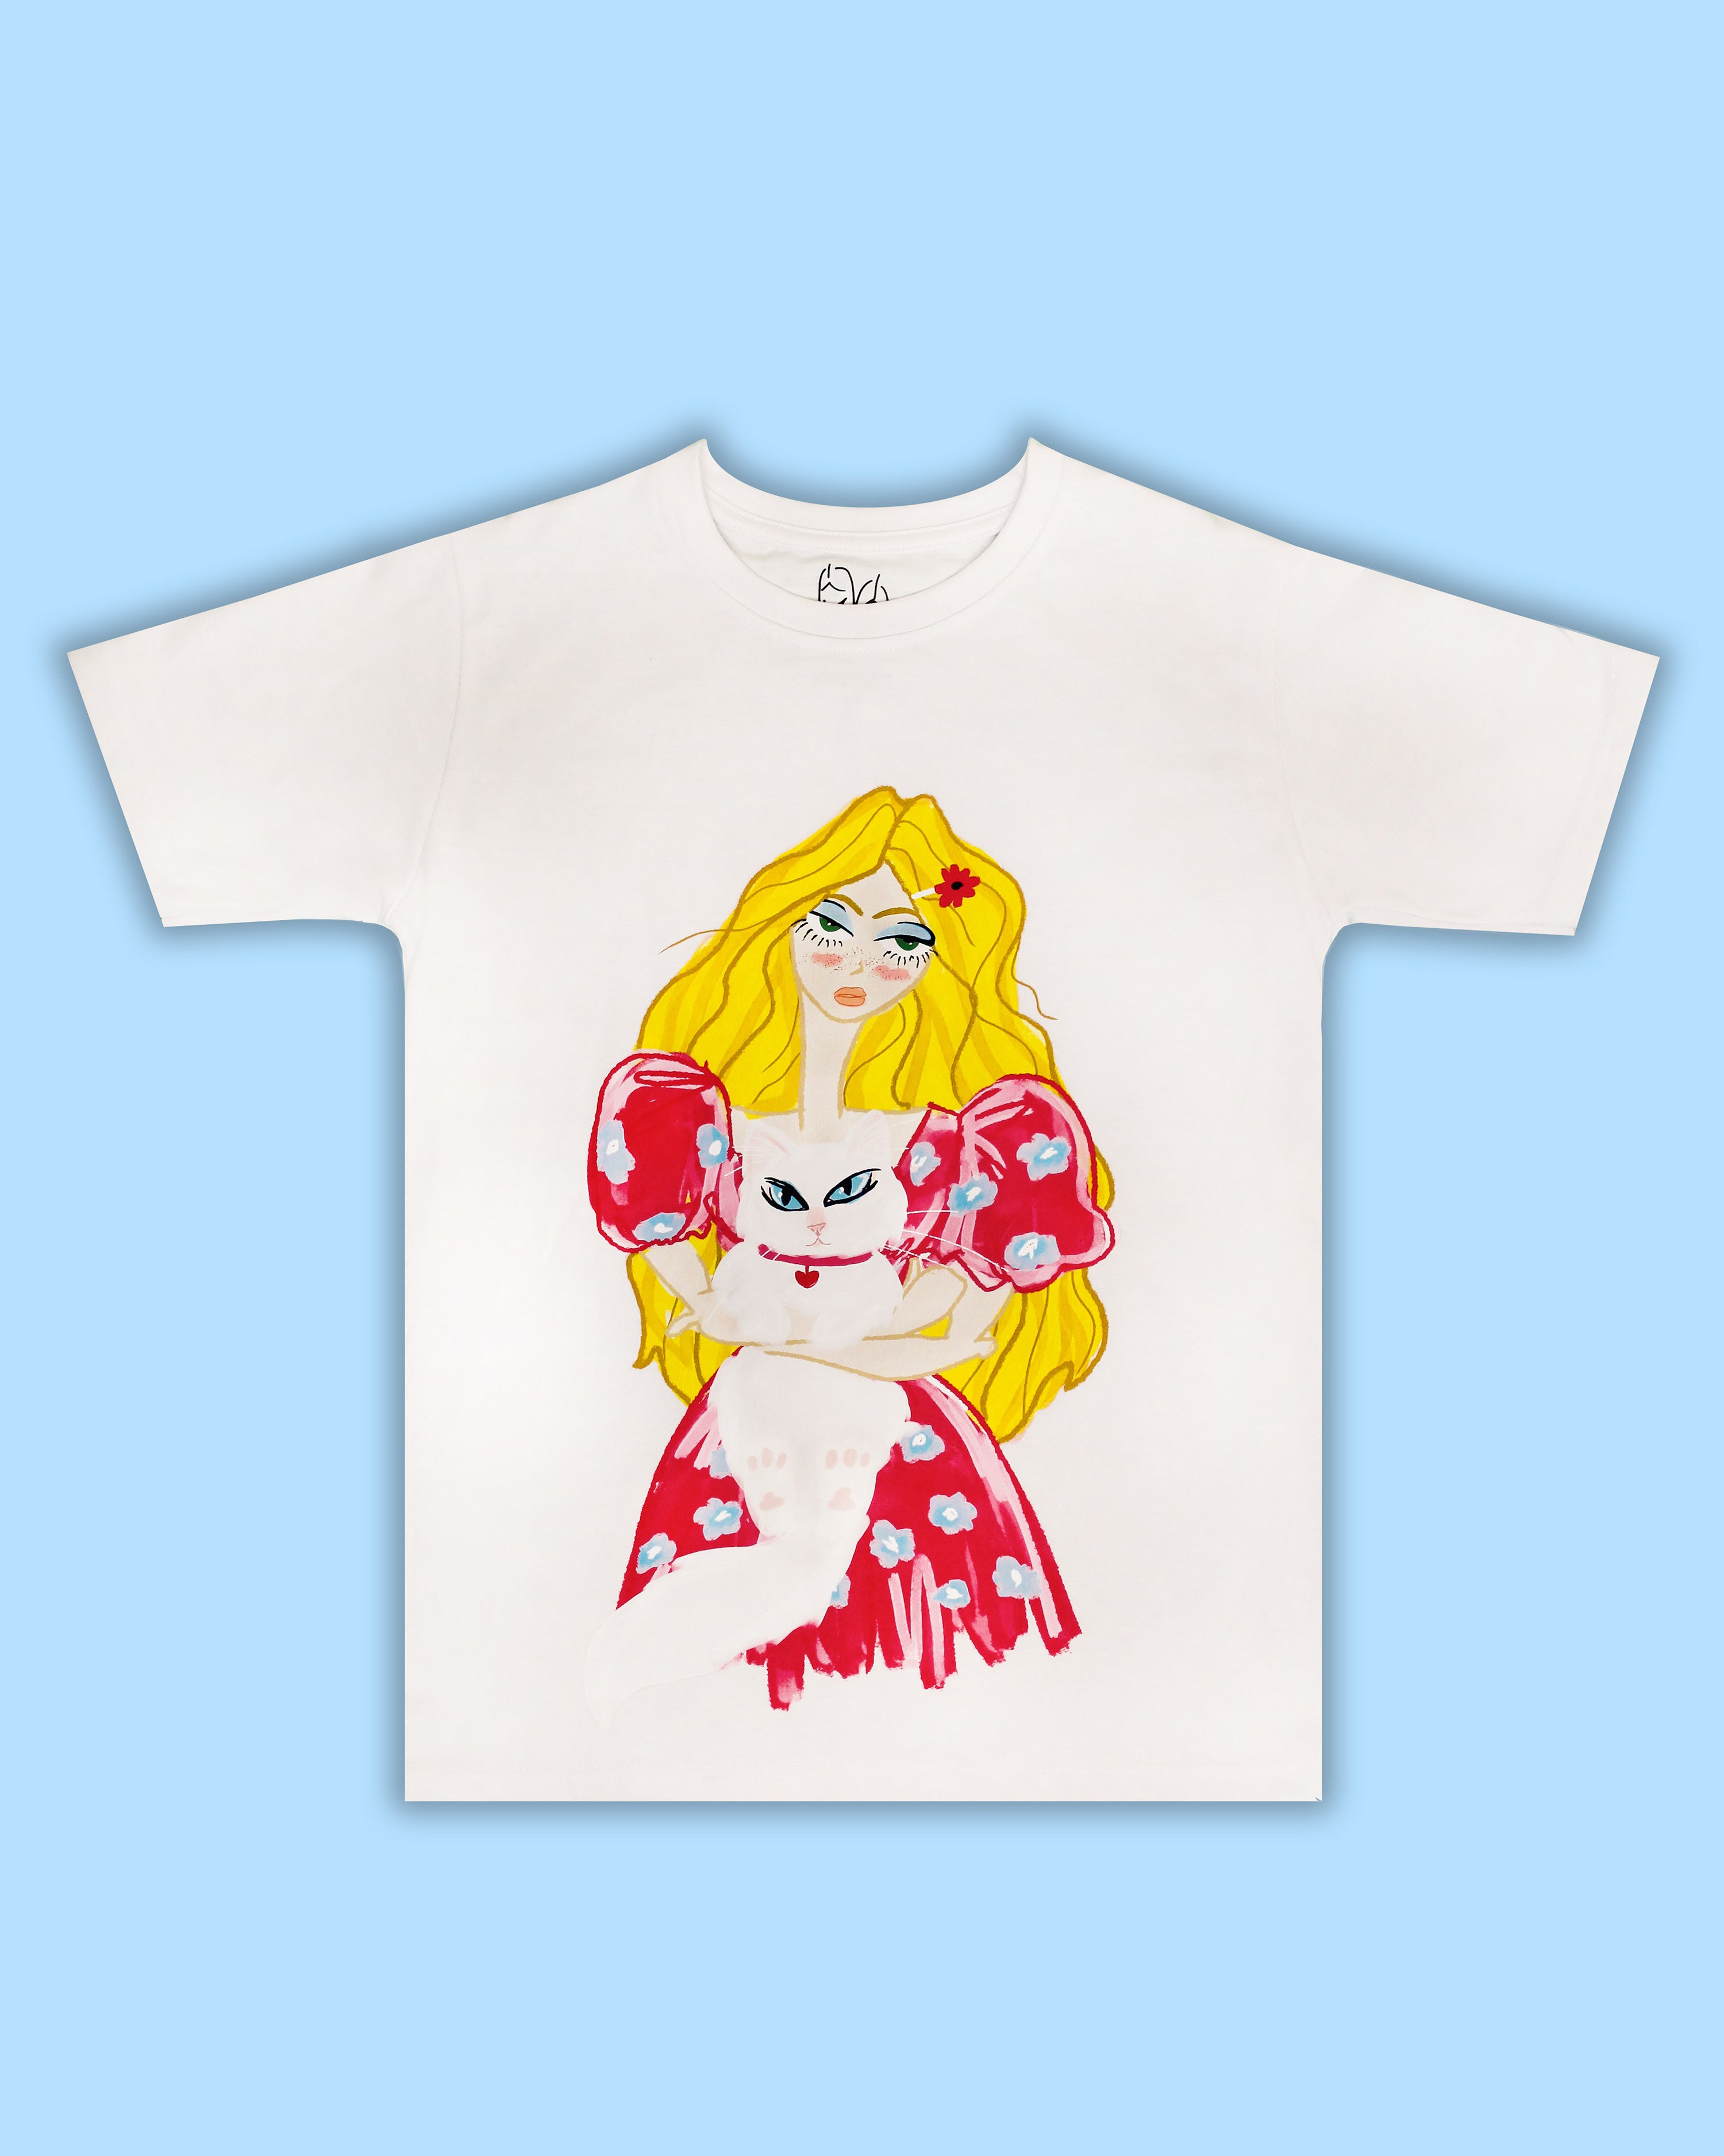 Duchess T-Shirt,Stunning Illustration,Beachy Blonde Curls,Hot Pink Dress,Persian White Cat,Heart-Shaped Collar,Dress Up Casual Jeans,100% Cotton Fabric,Lightweight Summer Wear,Cat Lover's Delight,Adorned by Cat Lovers,Sizes XS to XXL,Fashionable Tee,Unique Artwork,Stylish Look,Statement Piece,Versatile Fashion,UAE Fashion Trends,Instagram-Worthy Style,Fashionista's Must-Have,Summer Wardrobe Essential,Persian Cat Fashion